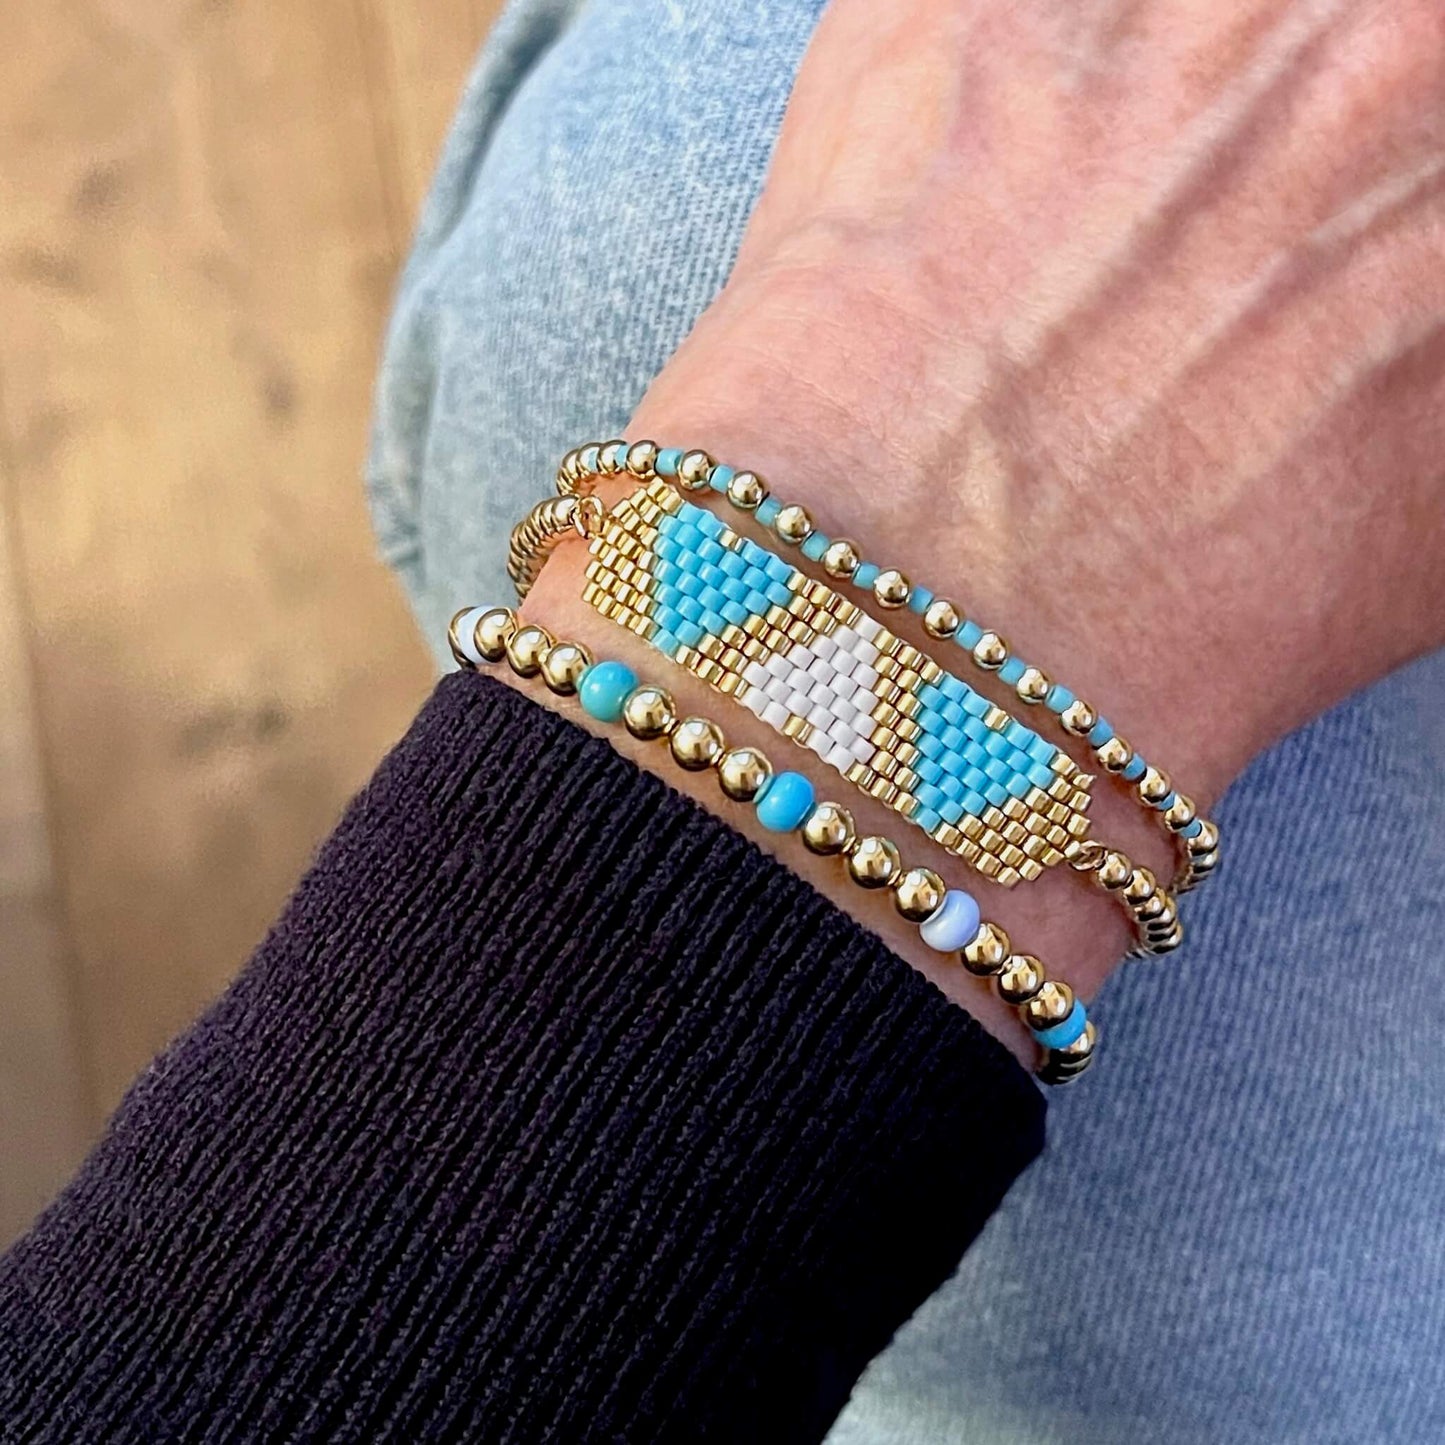 Heart beaded bracelet stack with white, blue, and gold beads.